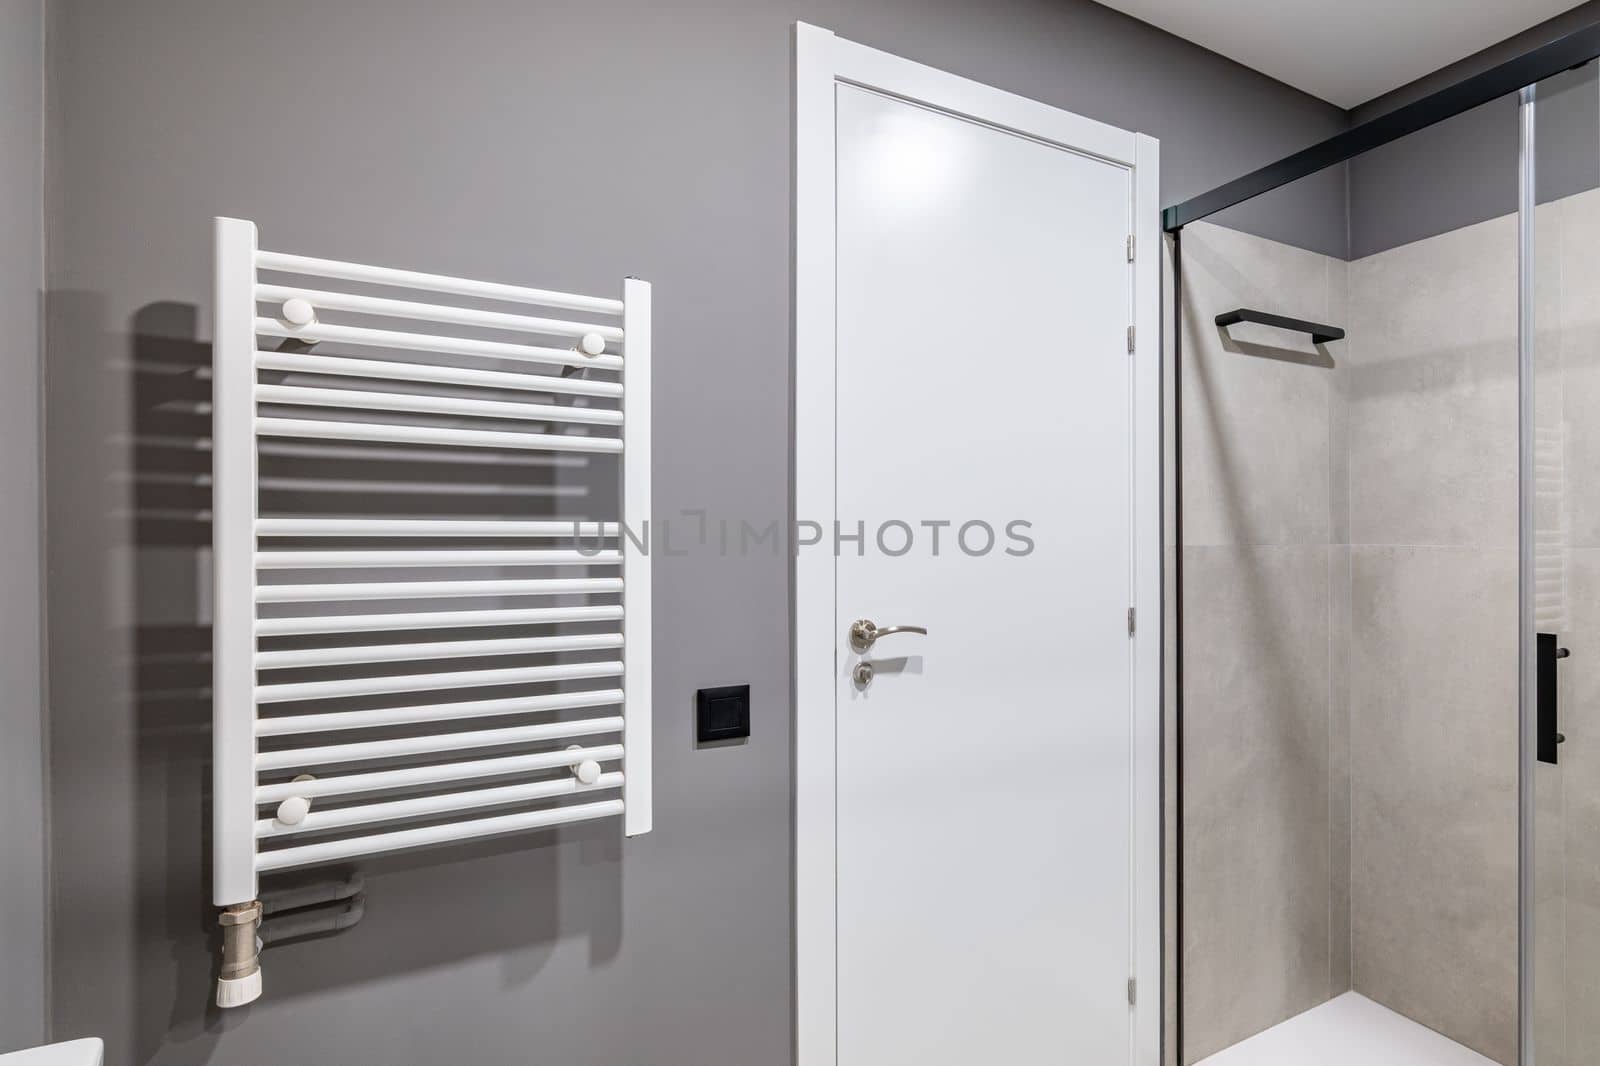 Part of a bathroom with a gray wall. White front door with metal handle. On the wall is a white radiator for drying towels. The shower area is enclosed by sliding glass doors. by apavlin